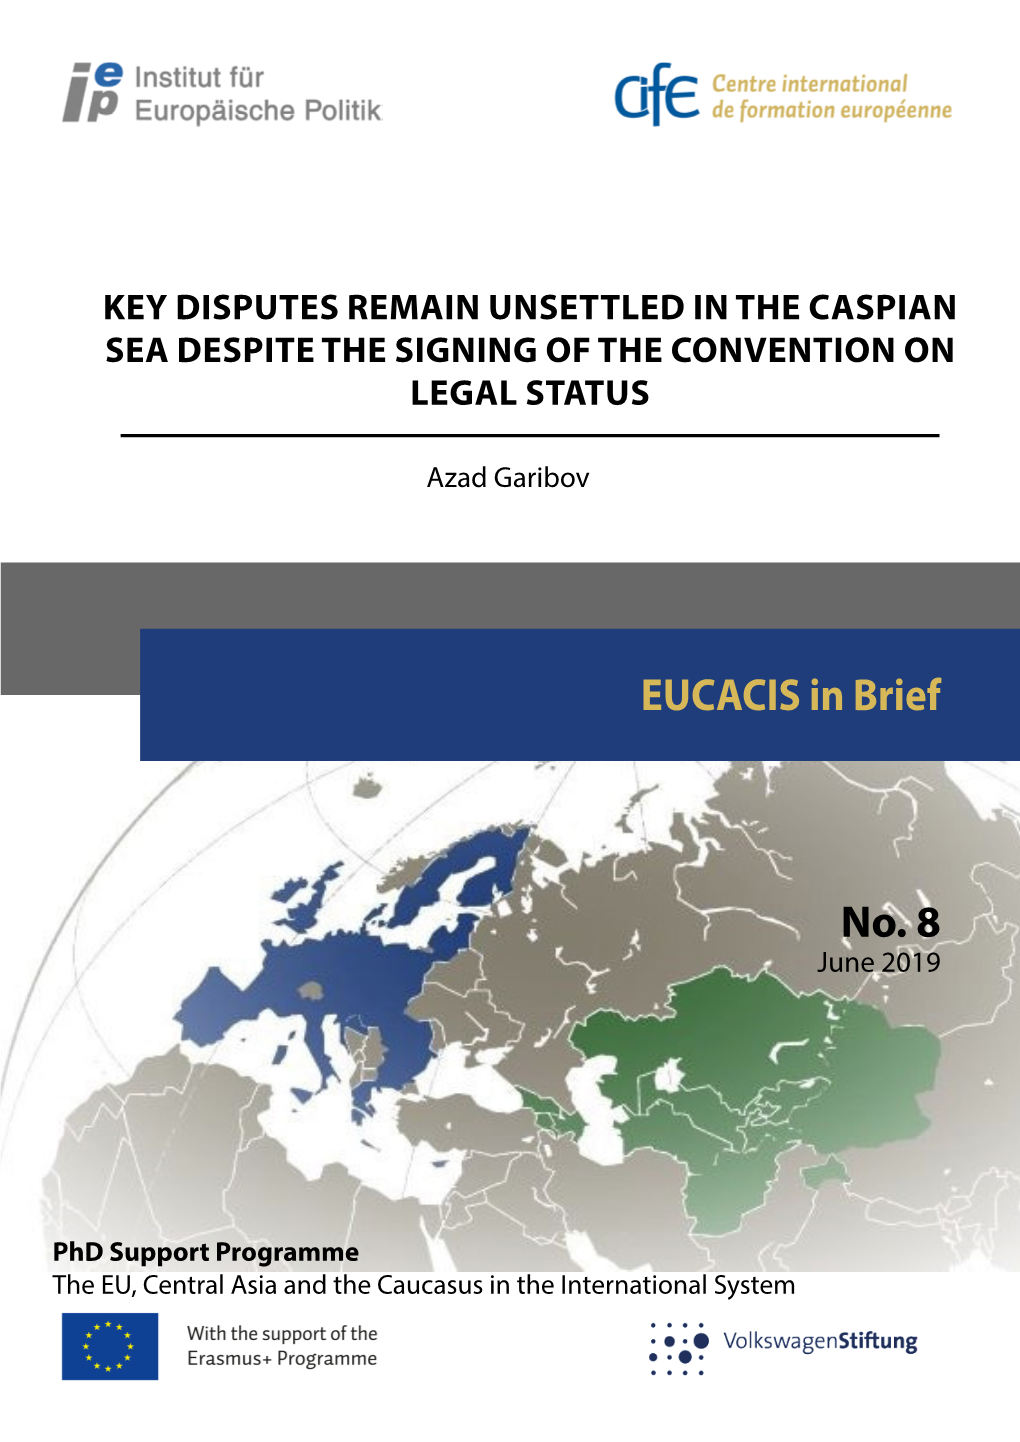 Key Disputes Remain Unsettled in the Caspian Sea Despite the Signing of the Convention on Legal Status